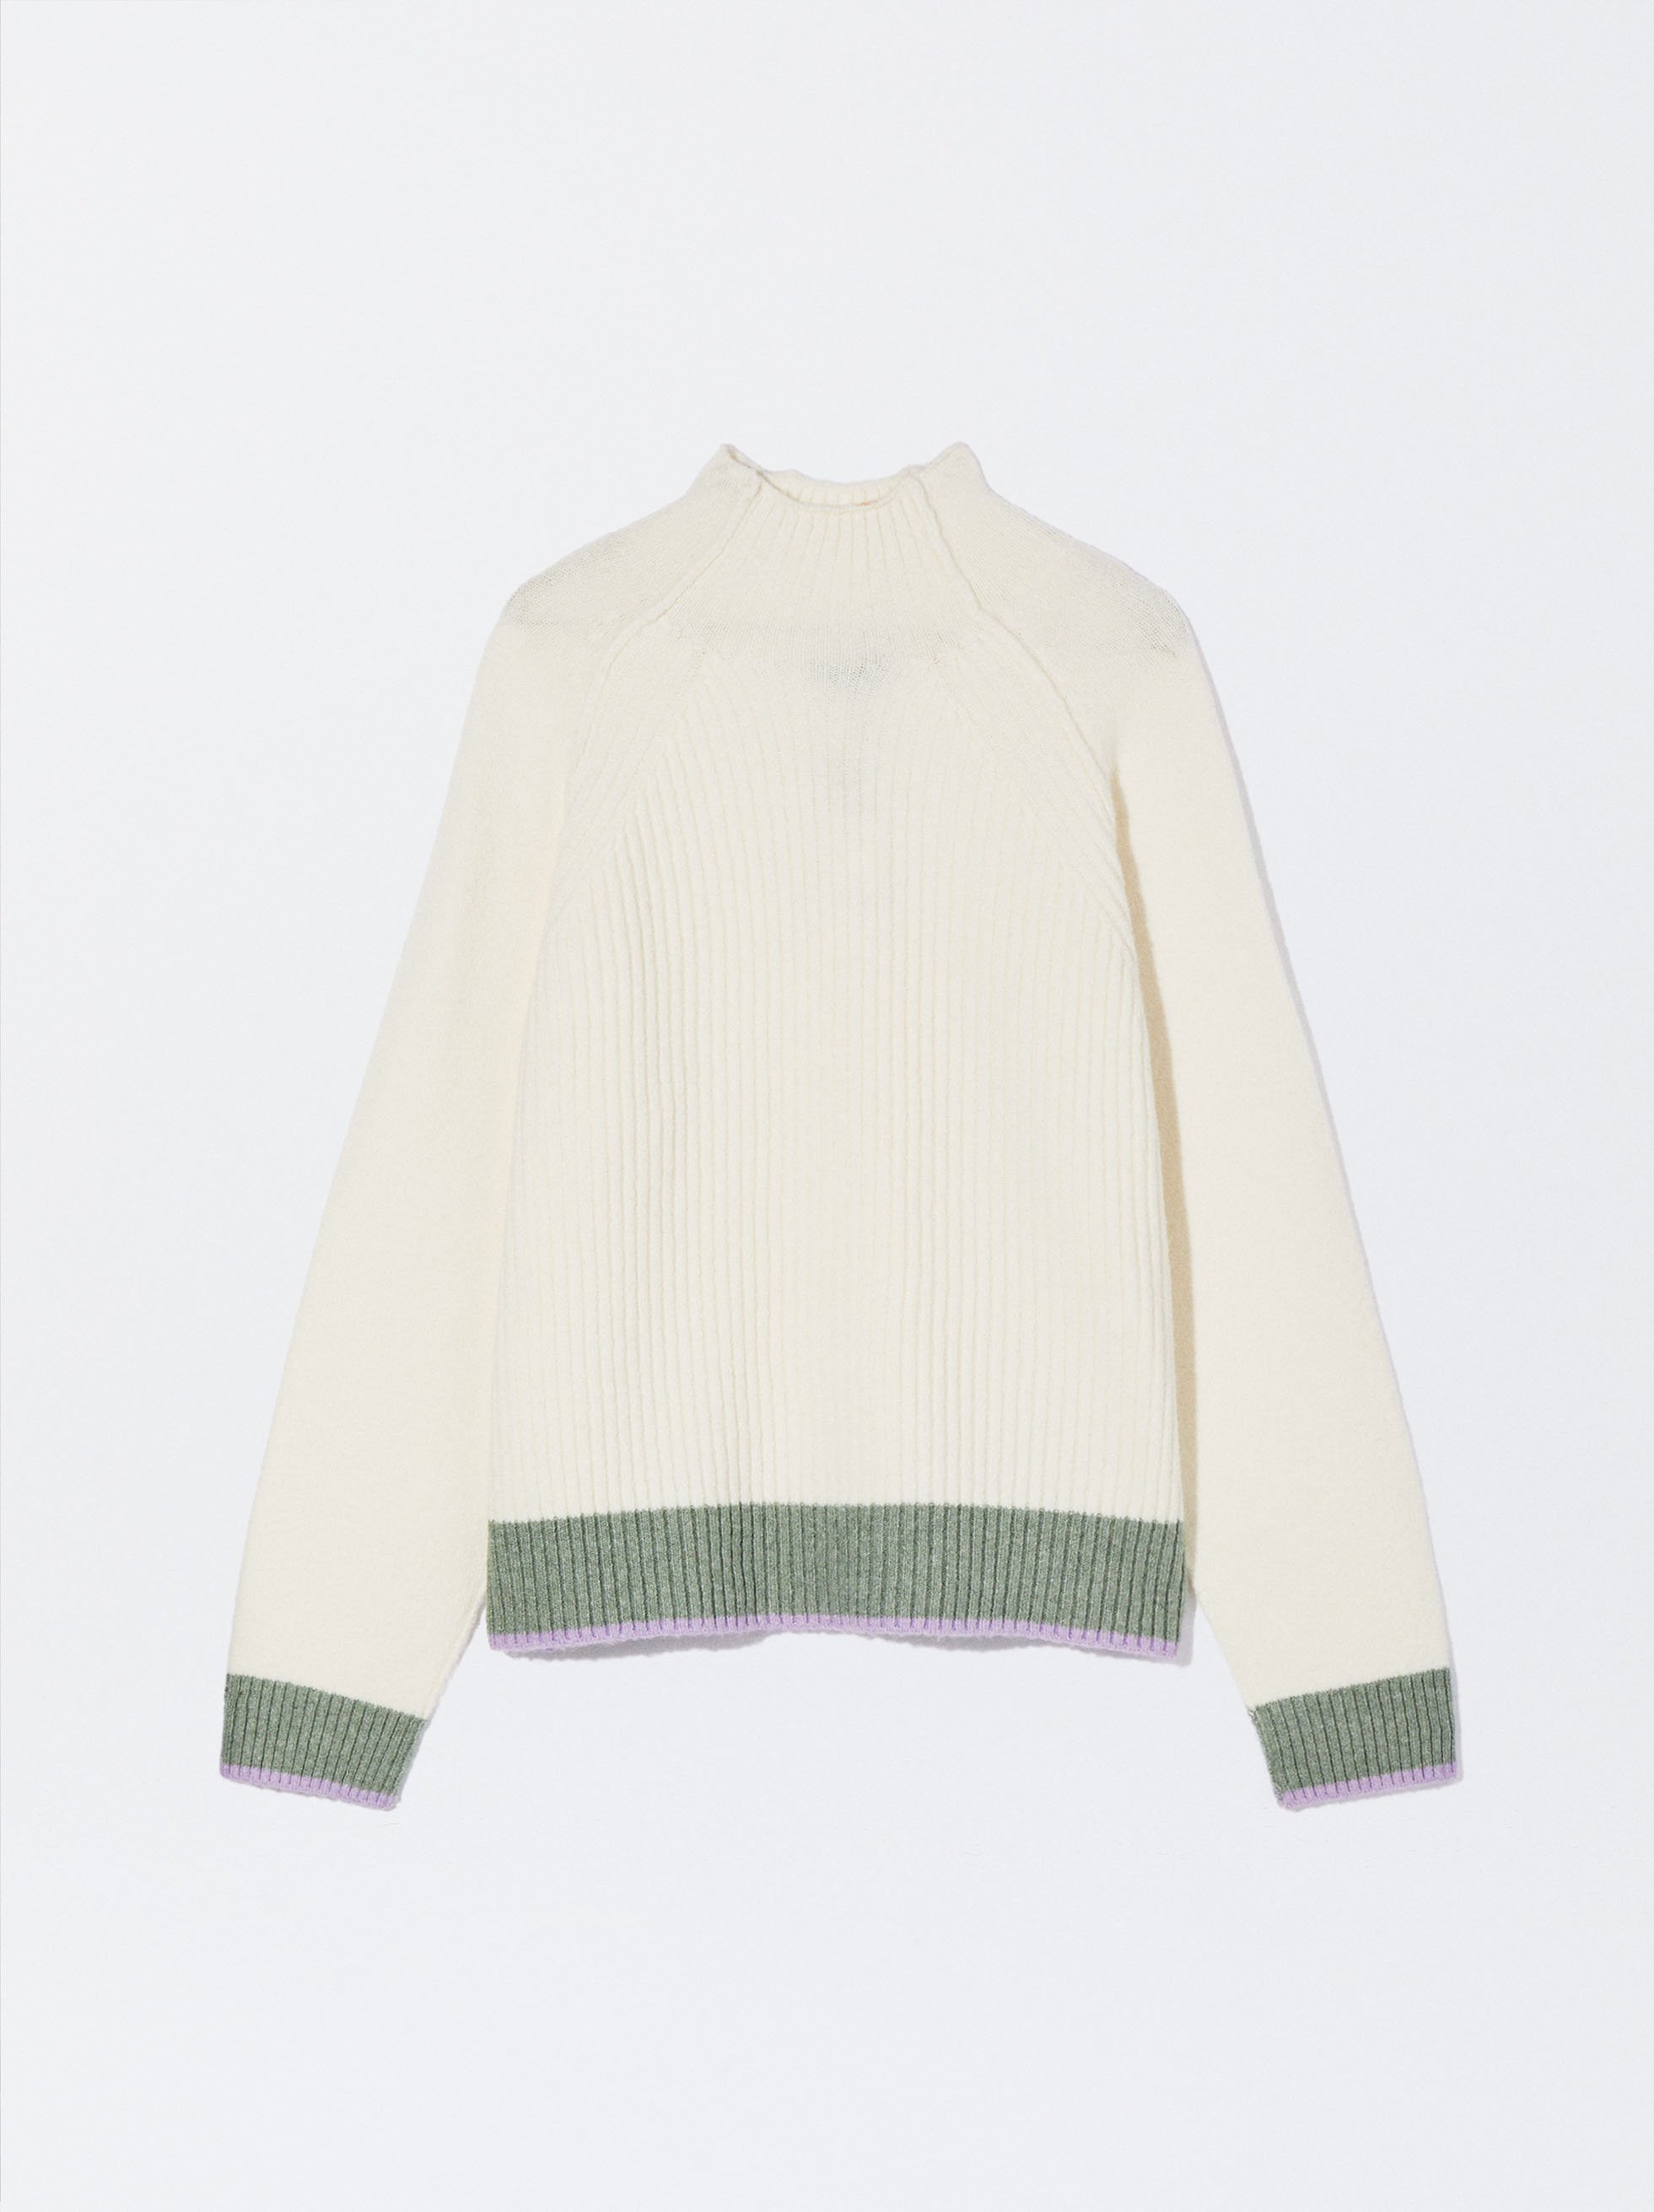 Online Exclusive - Knit Sweater image number 5.0